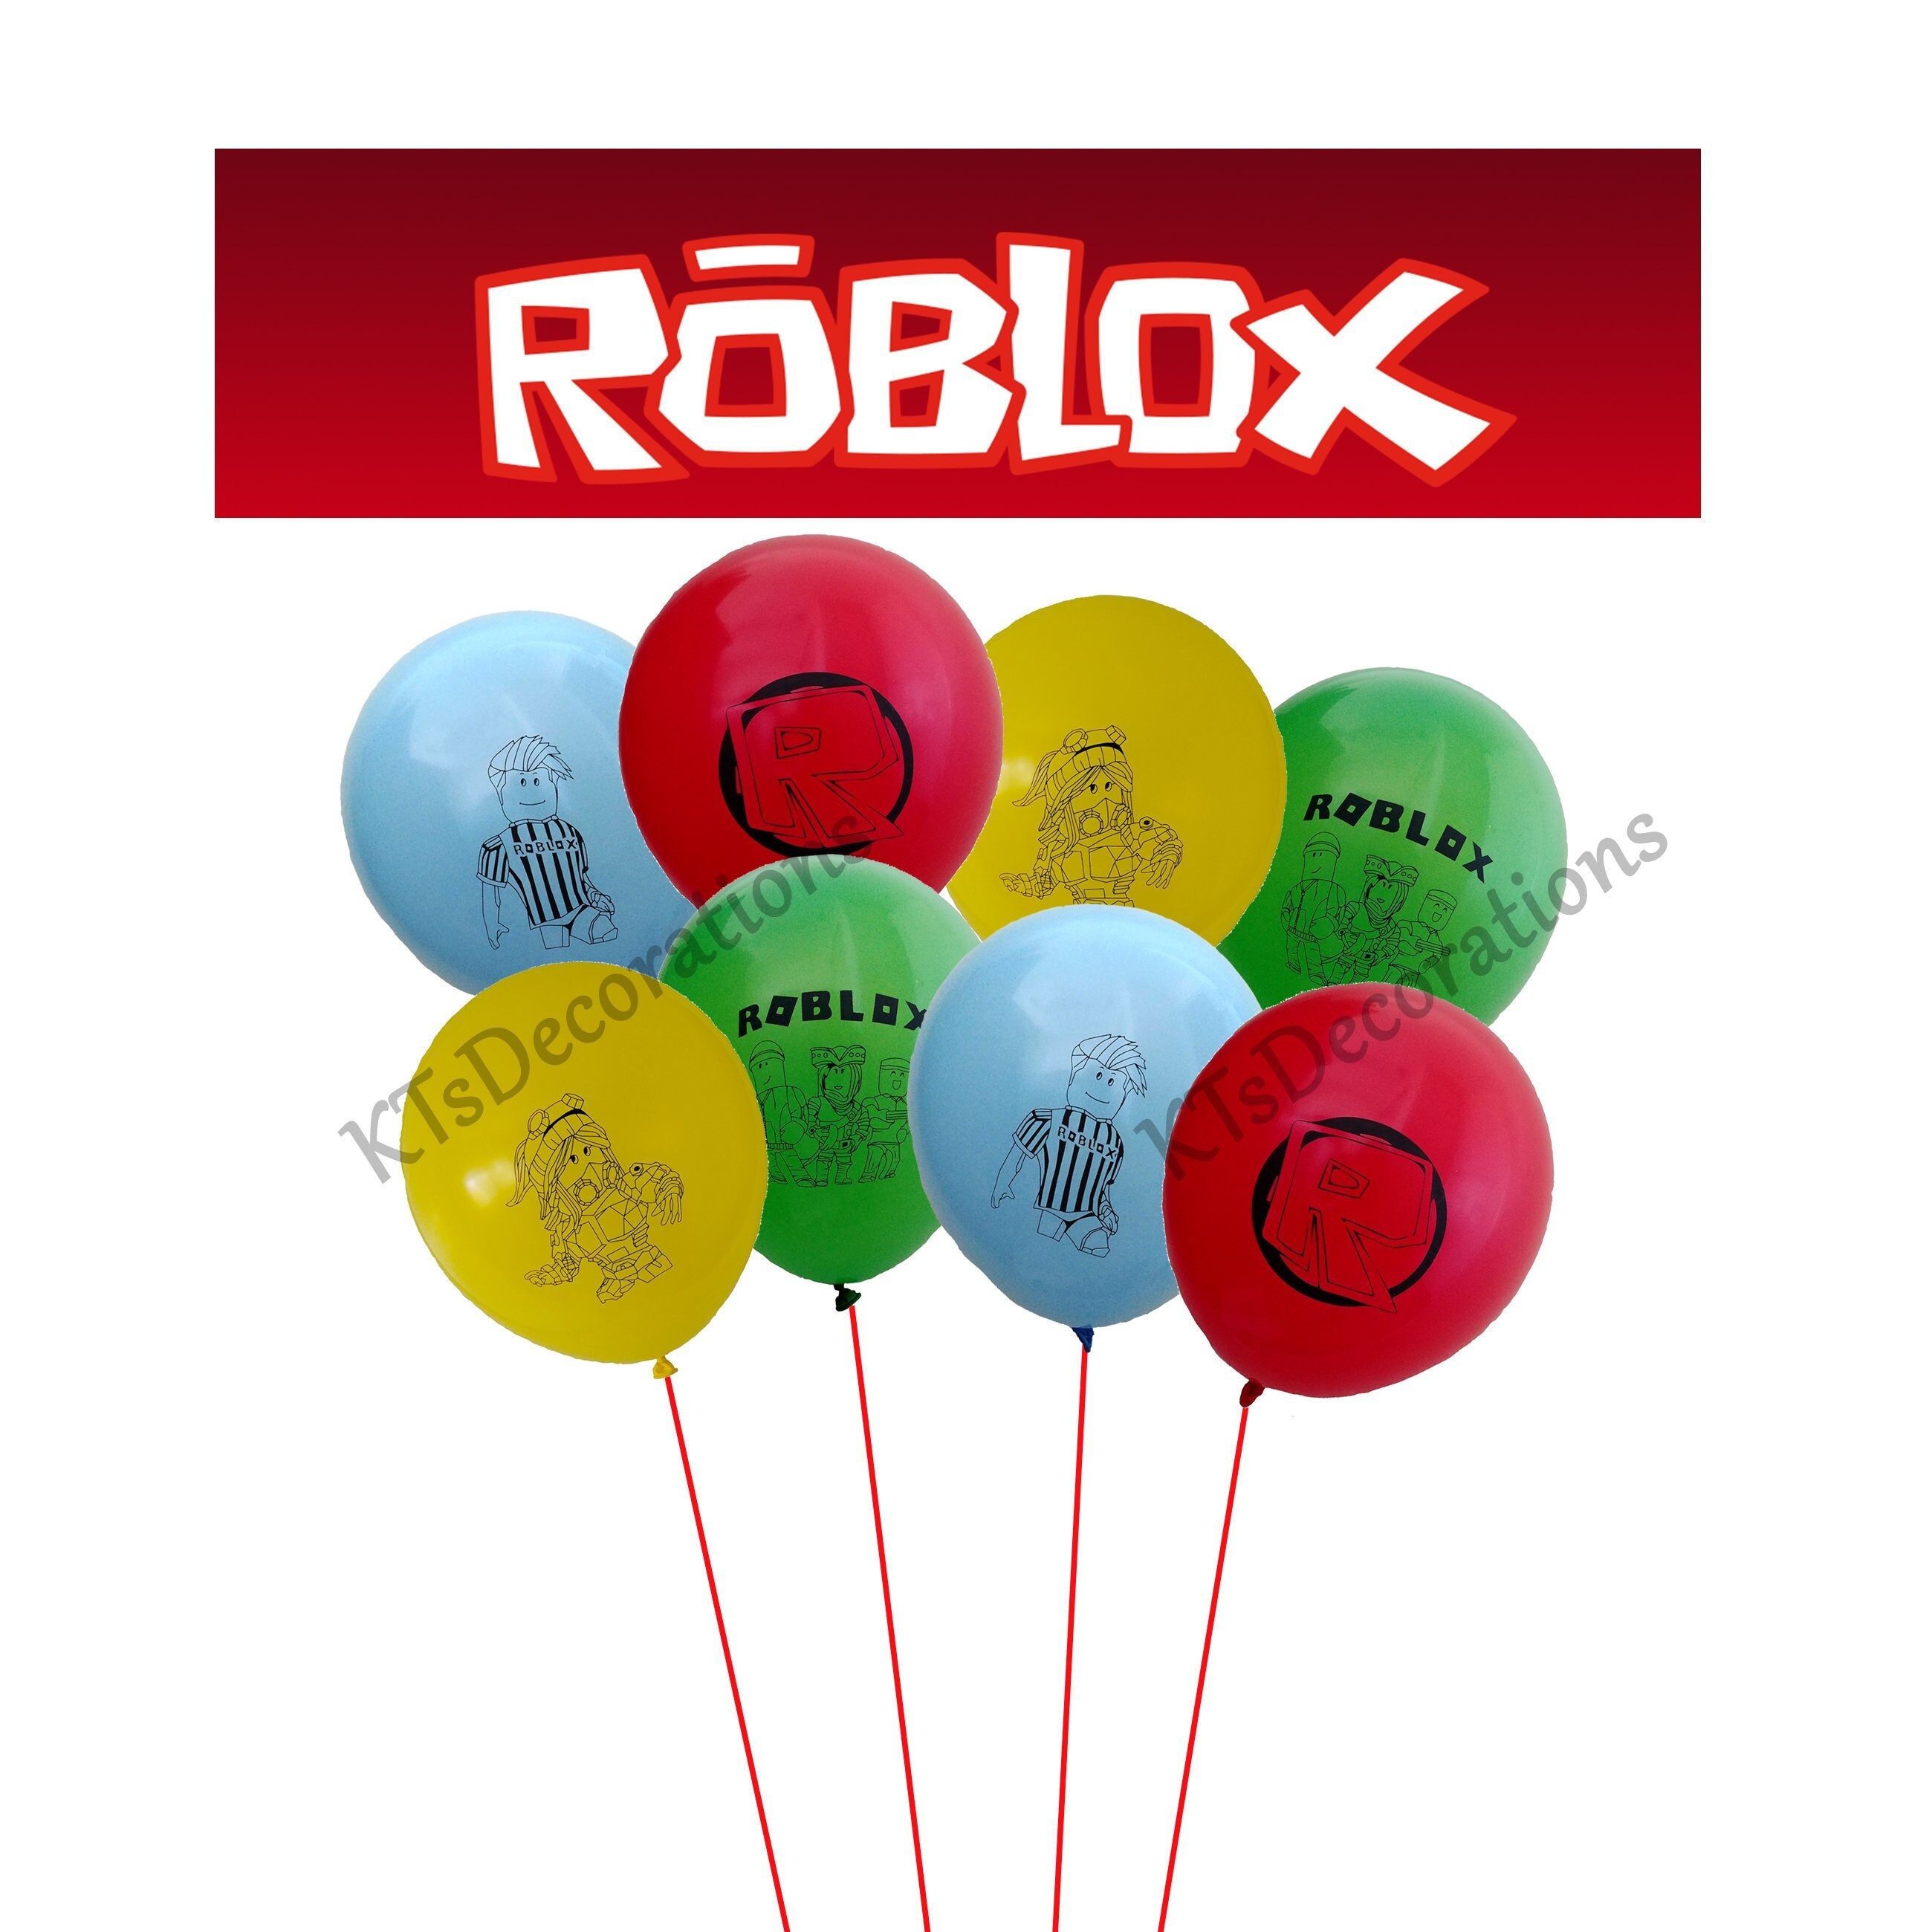 16 Roblox Balloons Roblox Birthday Party Decorations Party Etsy - party supplies 12 new roblox birthday party decor latex